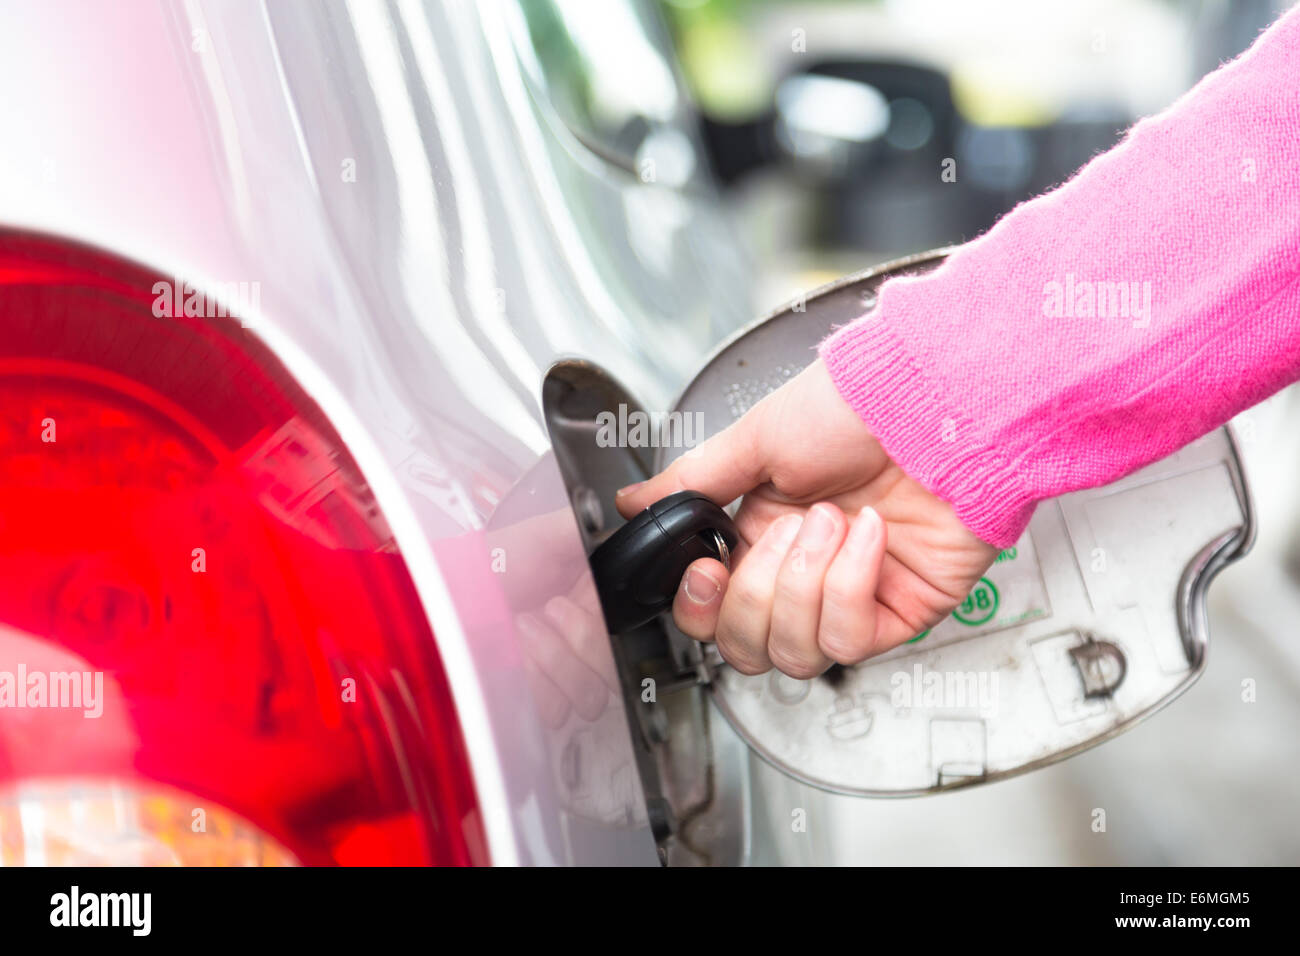 Opening the fuel tank with a key Stock Photo